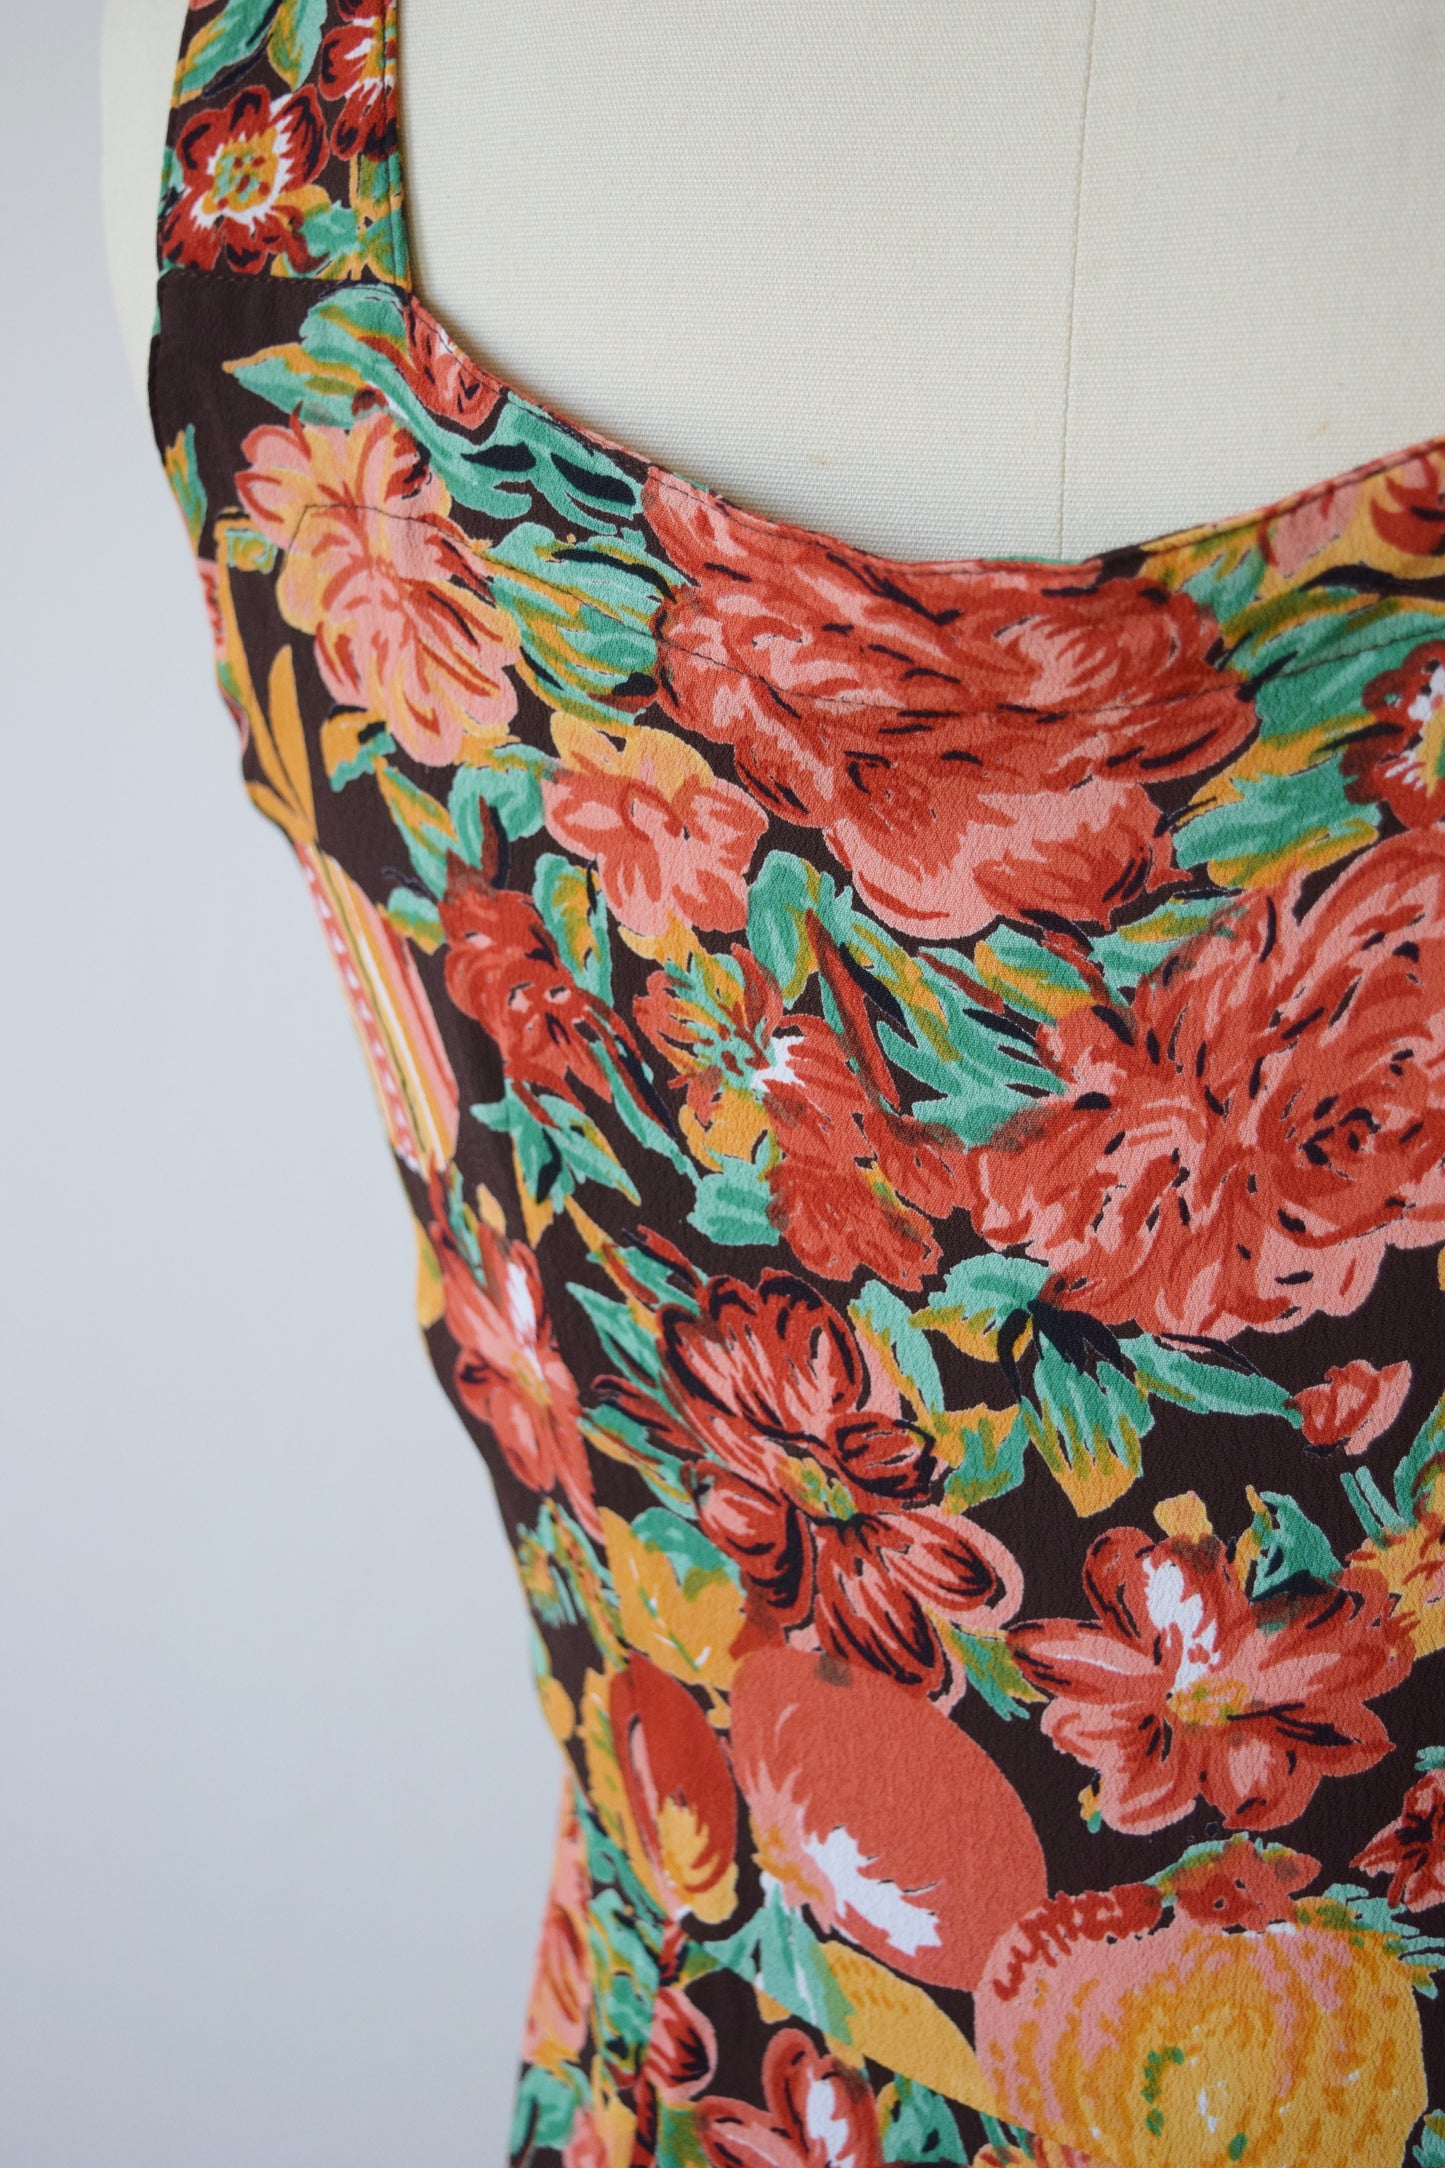 Vintage Repro Novelty Print Fruit and Flowers Sundress by Loco Lindo